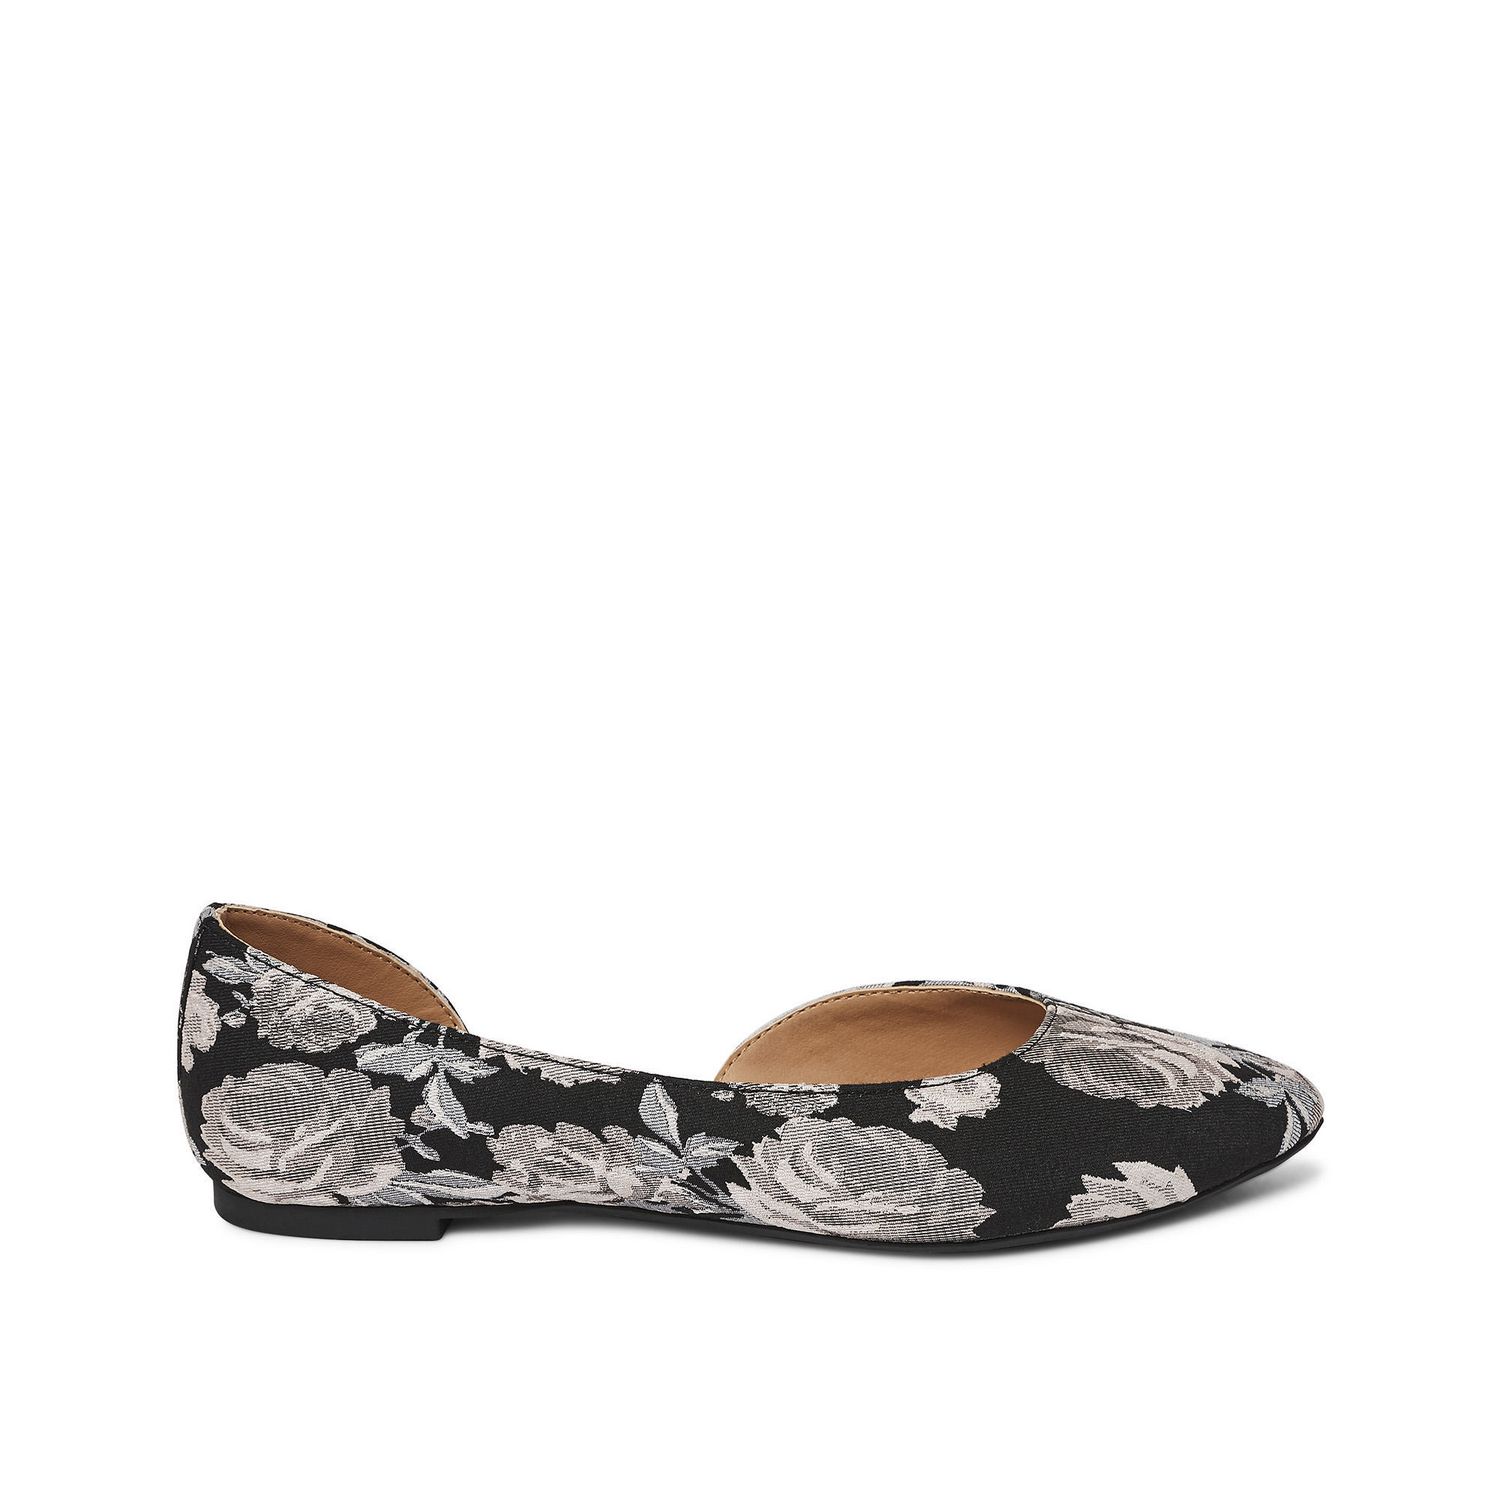 floral flats womens shoes